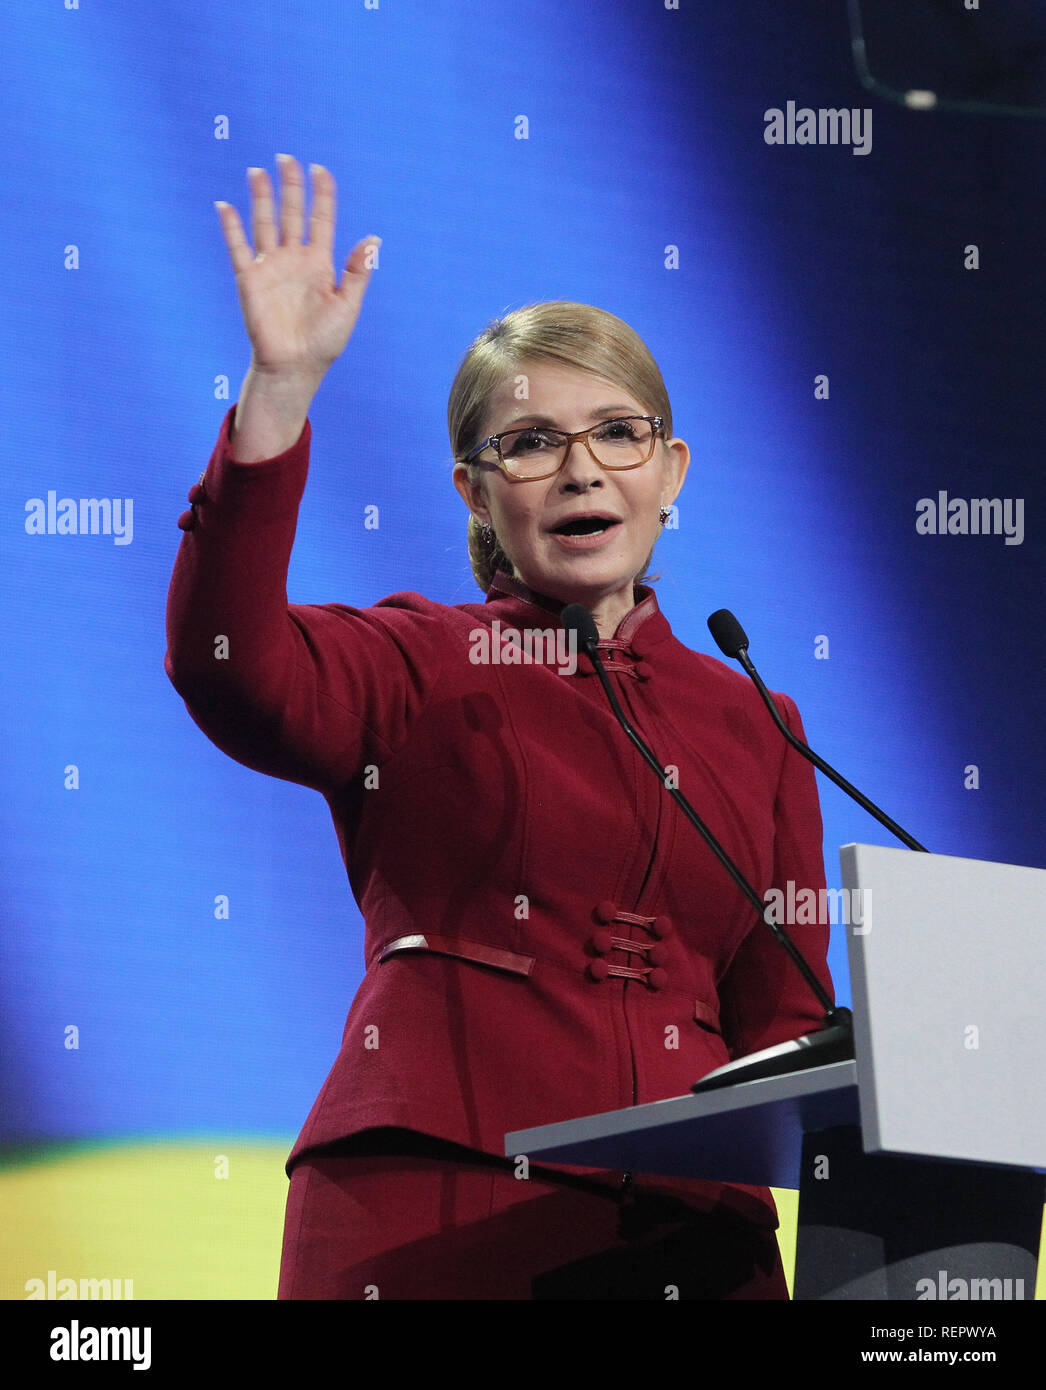 Ukrainian presidential candidate Yulia Tymoshenko seen speaking during the event in Kiev. Tymoshenko was nominated by the party congress as their candidate for presidential elections on March 31. Stock Photo